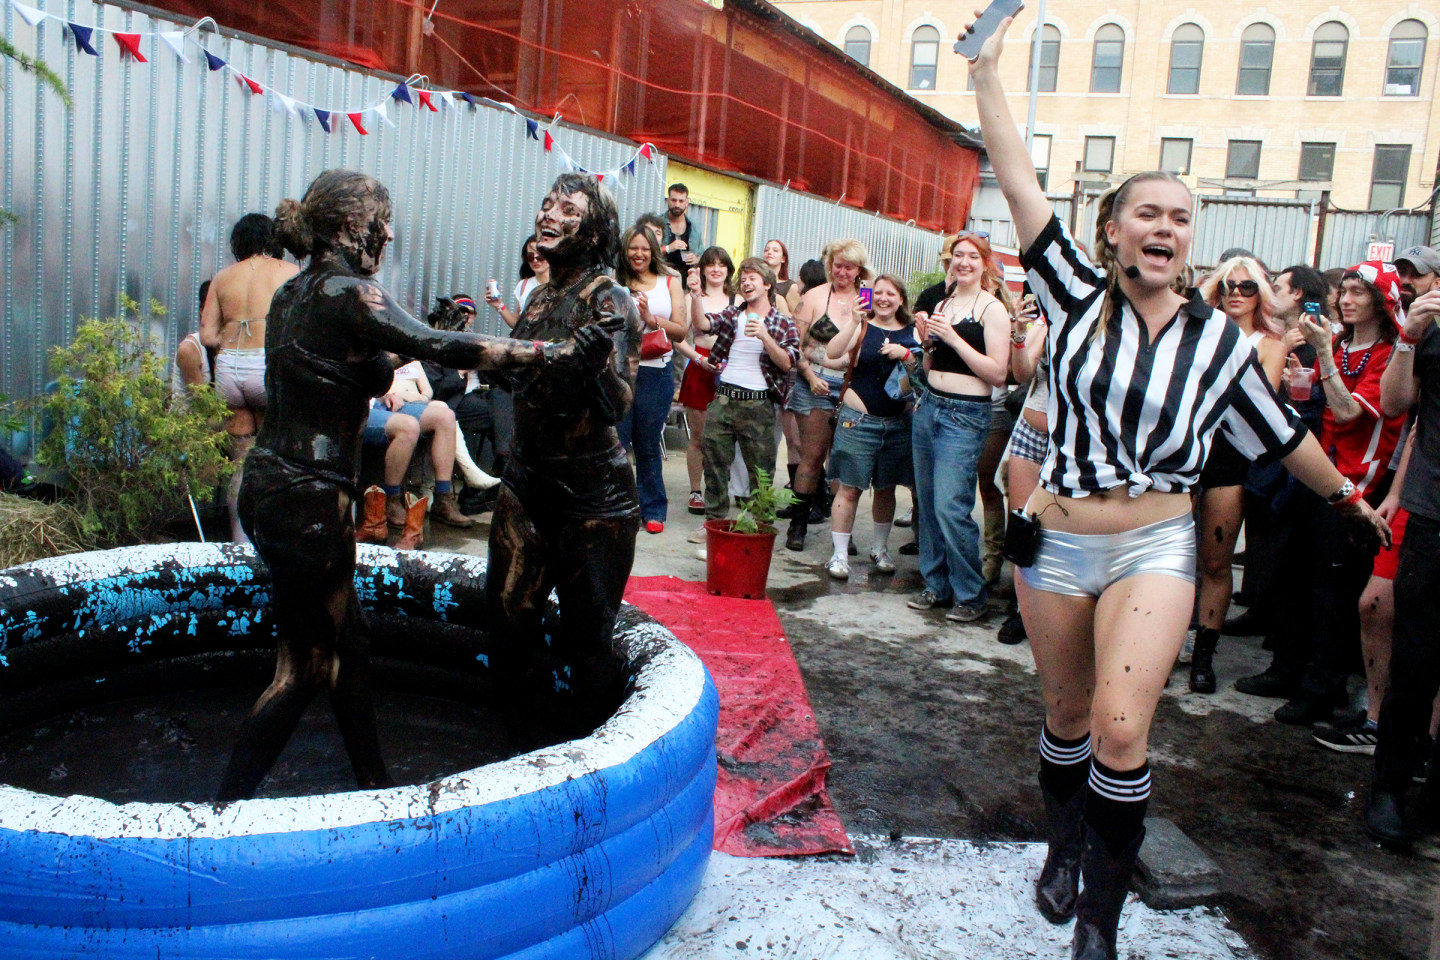 The Great American Mud Wrestling Show is the sexy, trashy punk party of your dreams